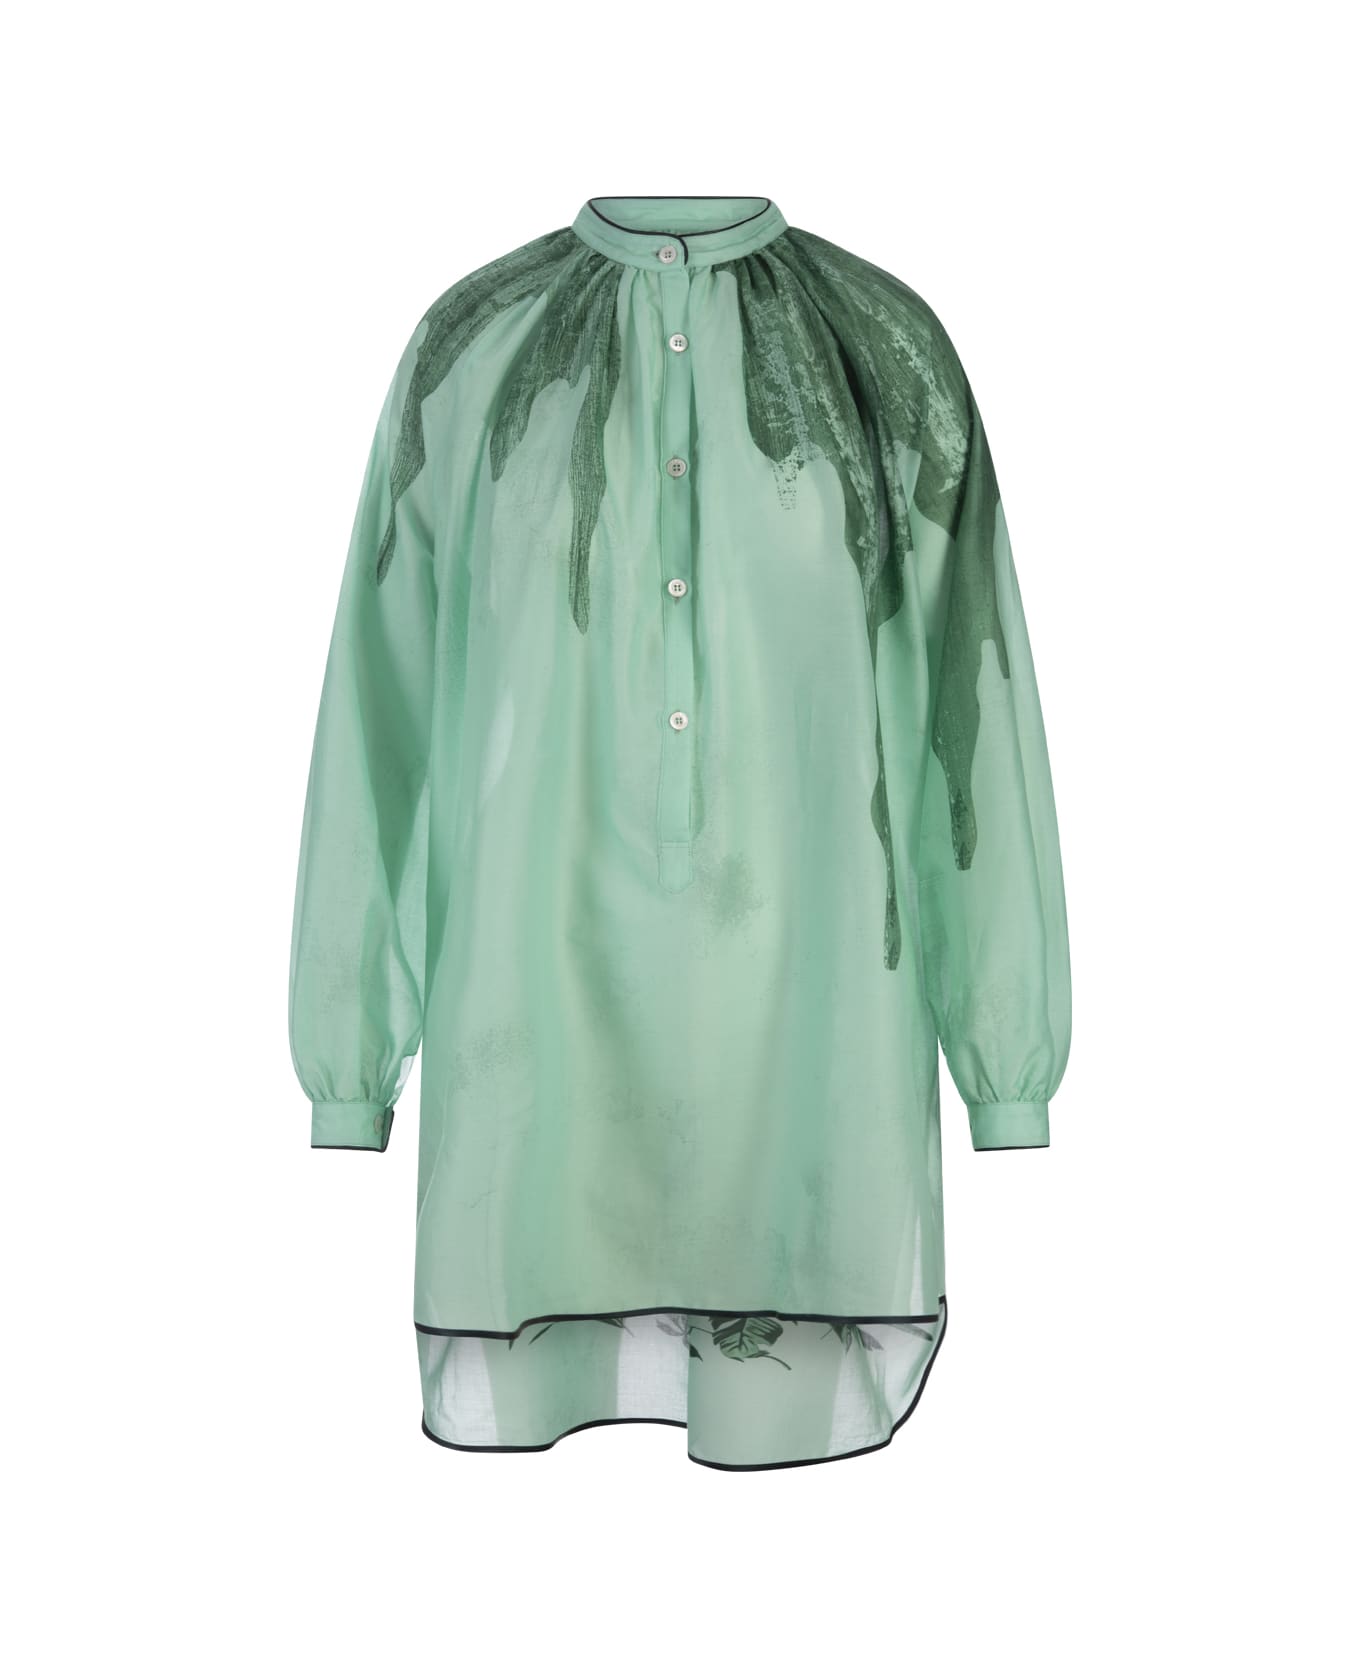 For Restless Sleepers Flowers Green Tizio Shirt - Green ブラウス